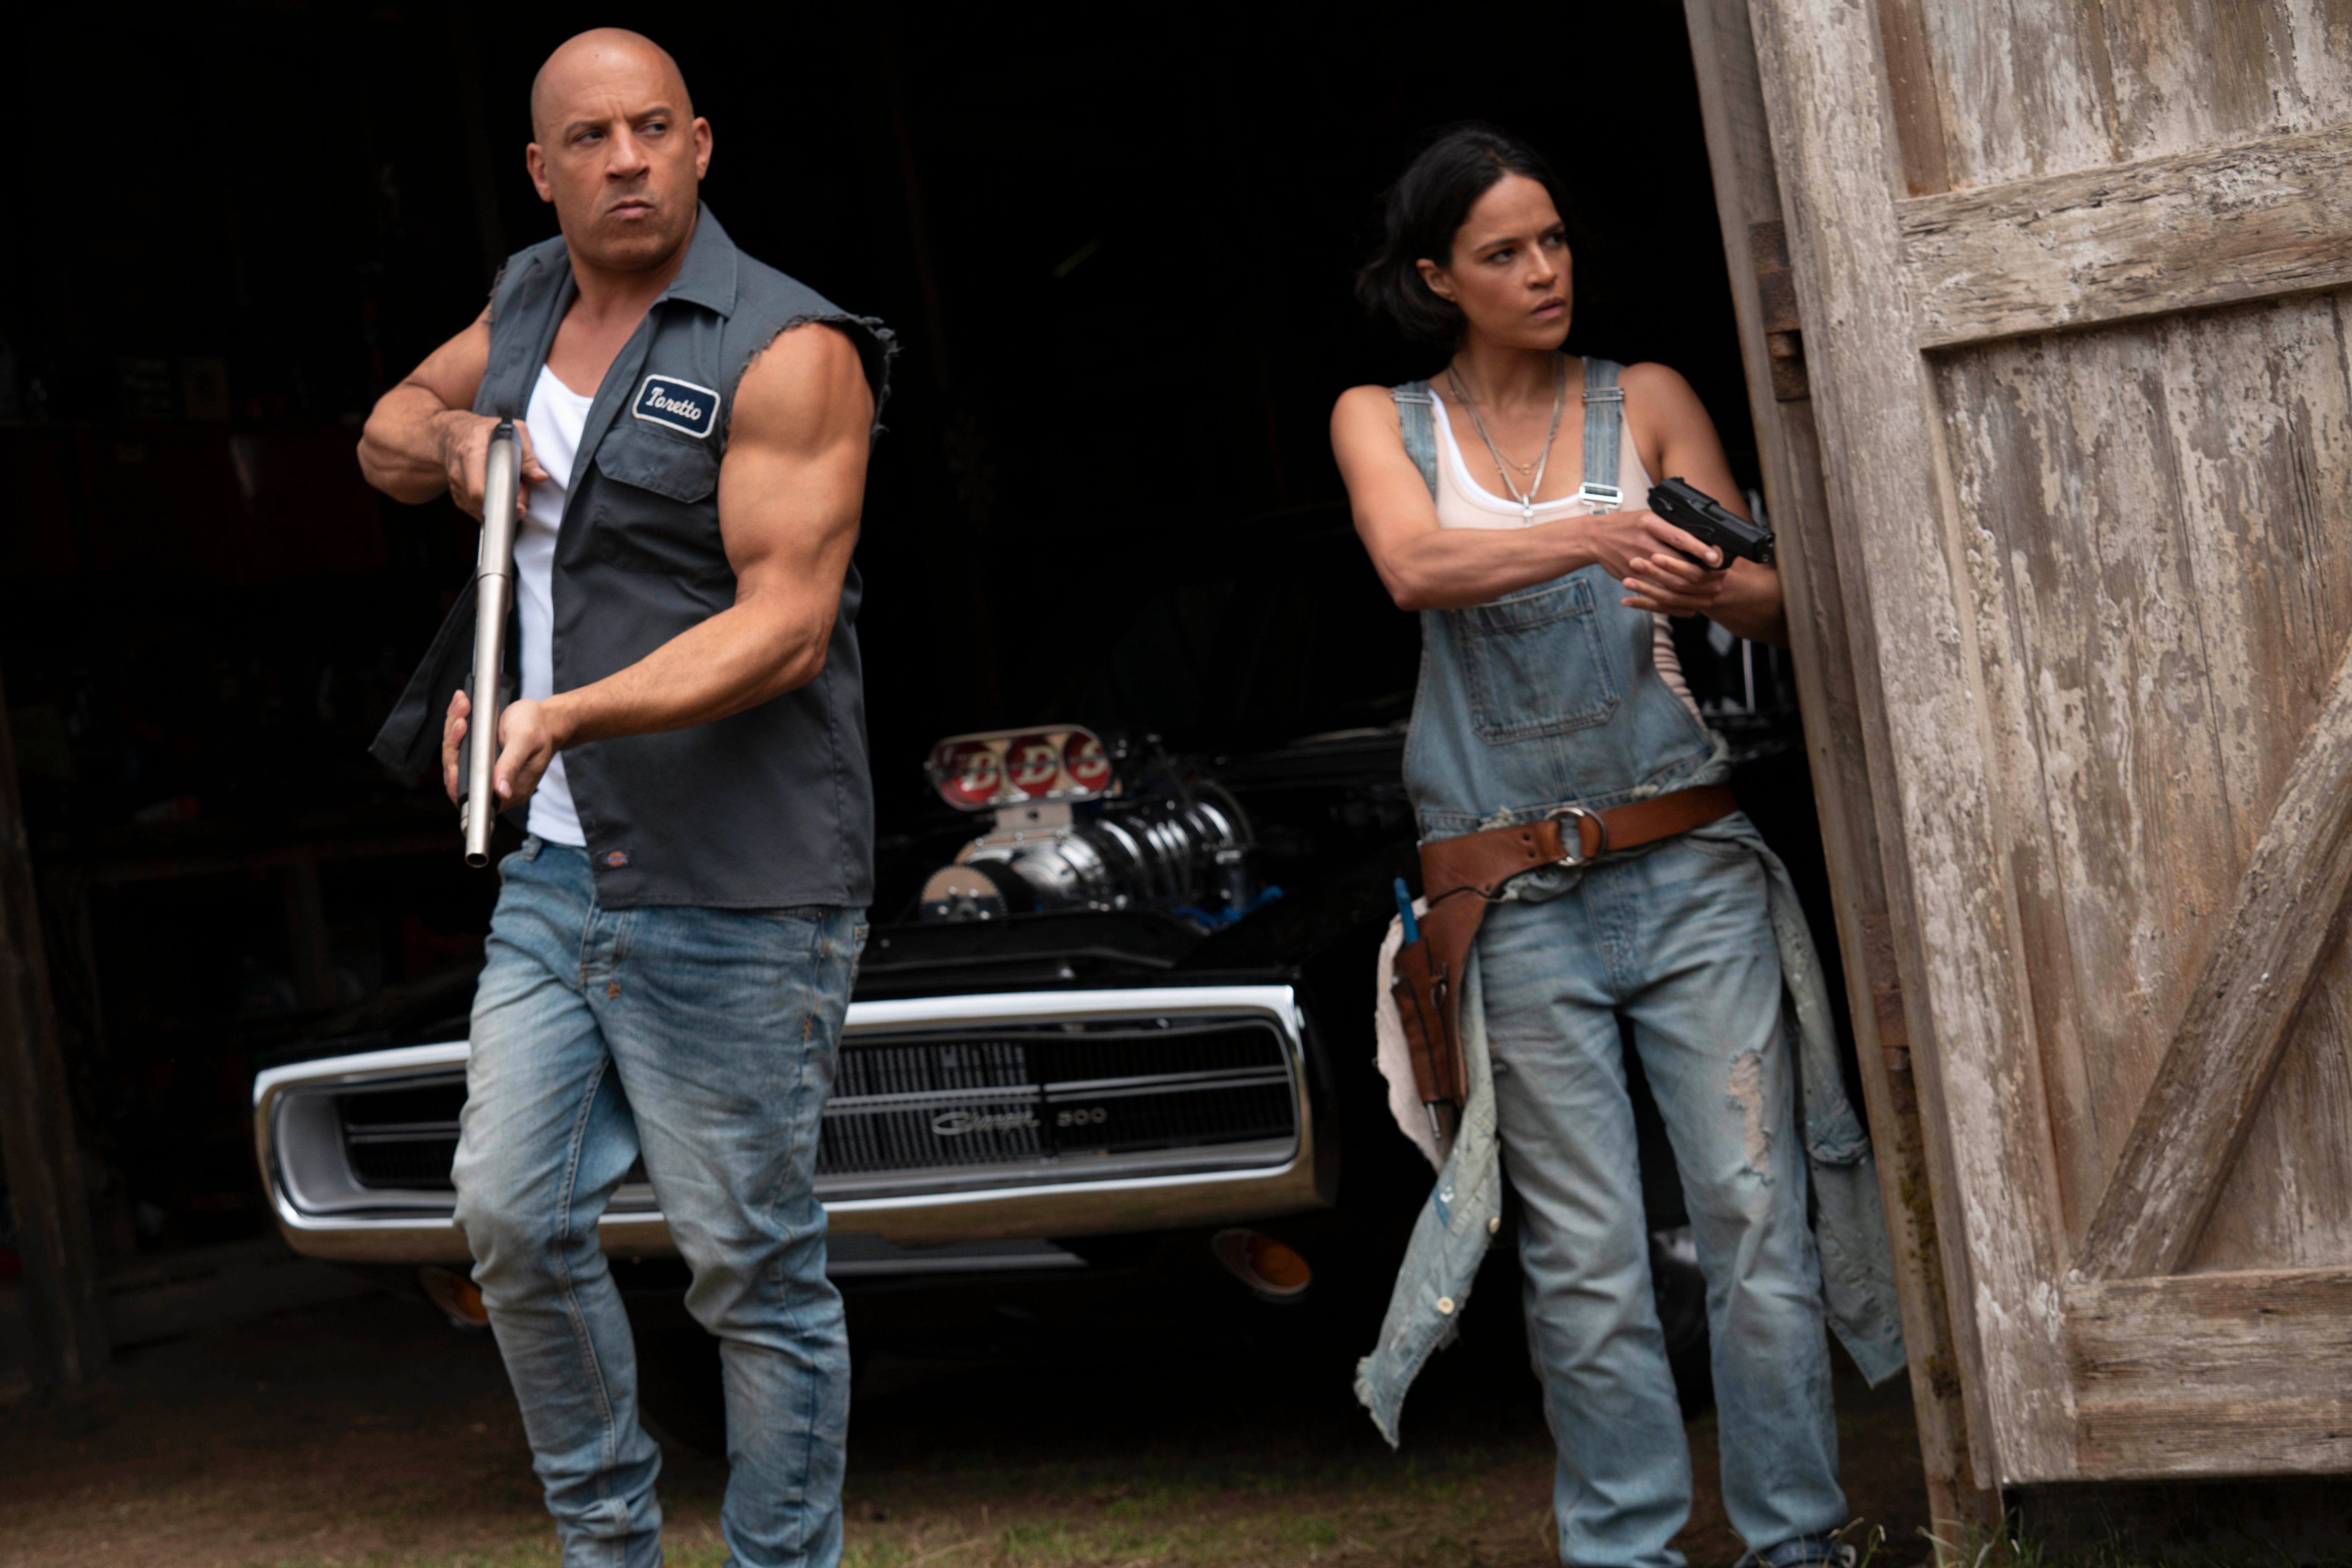 movie, fast & furious 9, dominic toretto, letty ortiz, michelle rodriguez, vin diesel, fast & furious